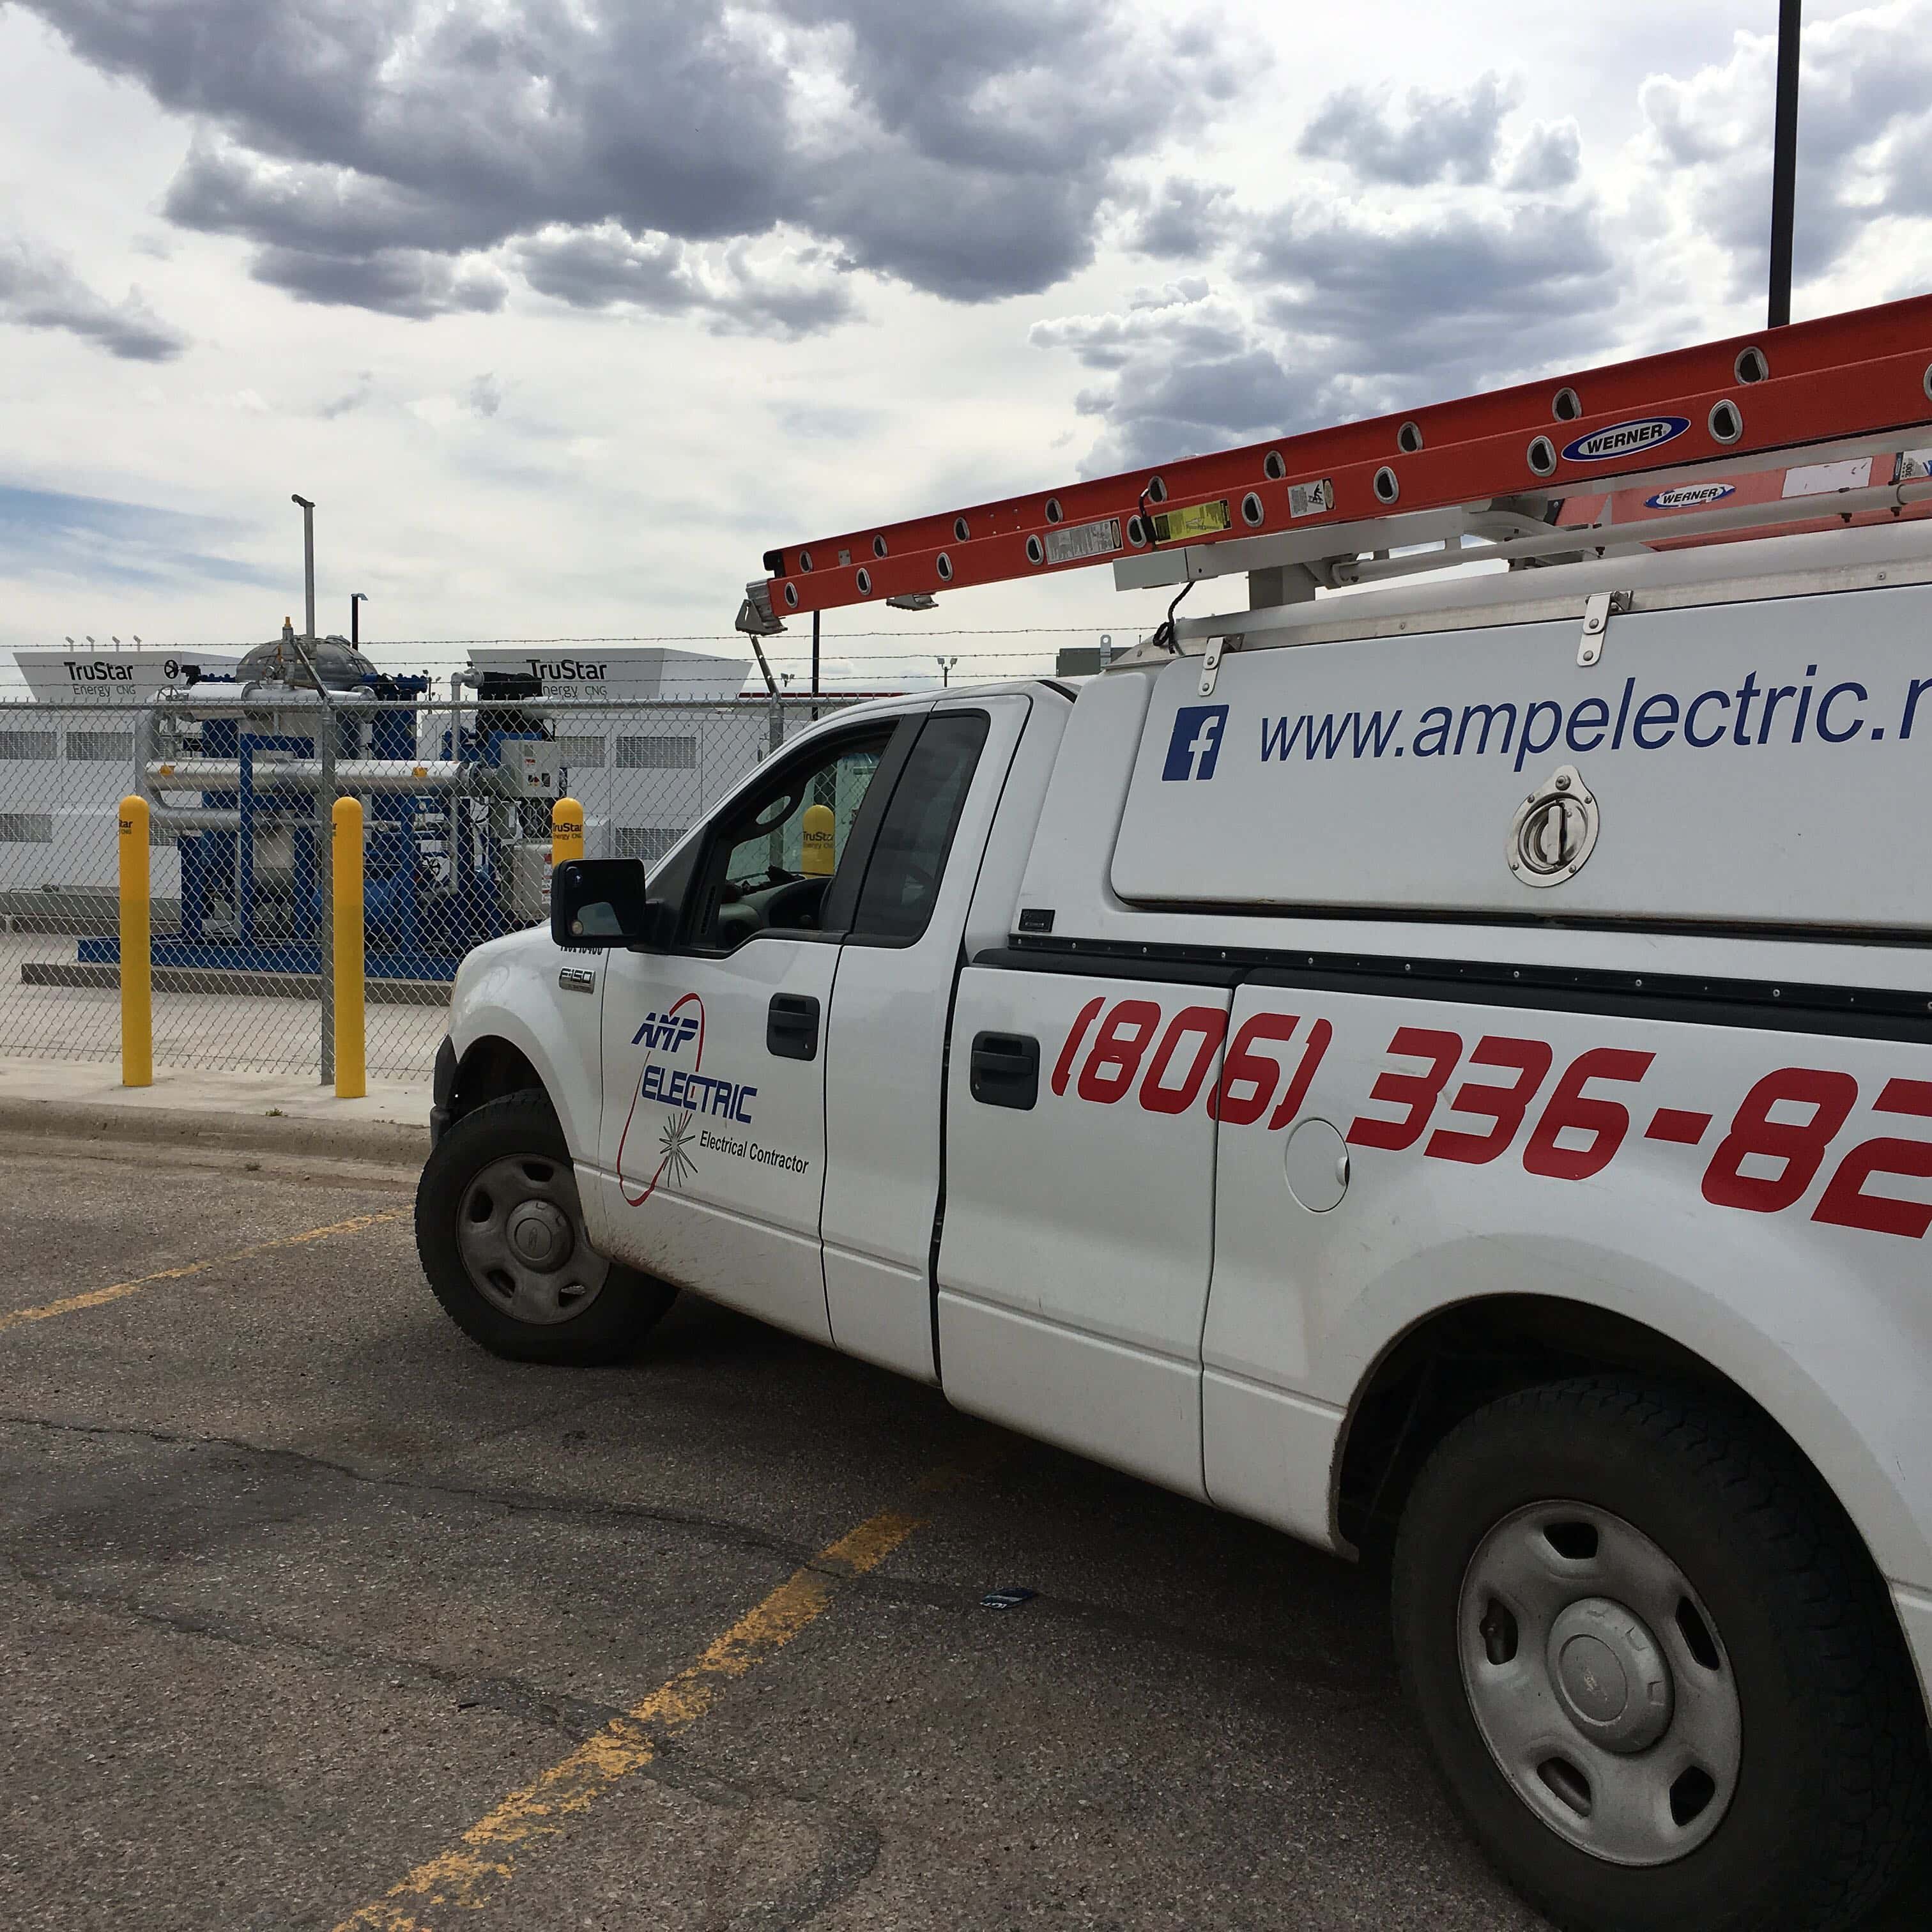 Amp Electric - Amarillo, TX, US, call electrician